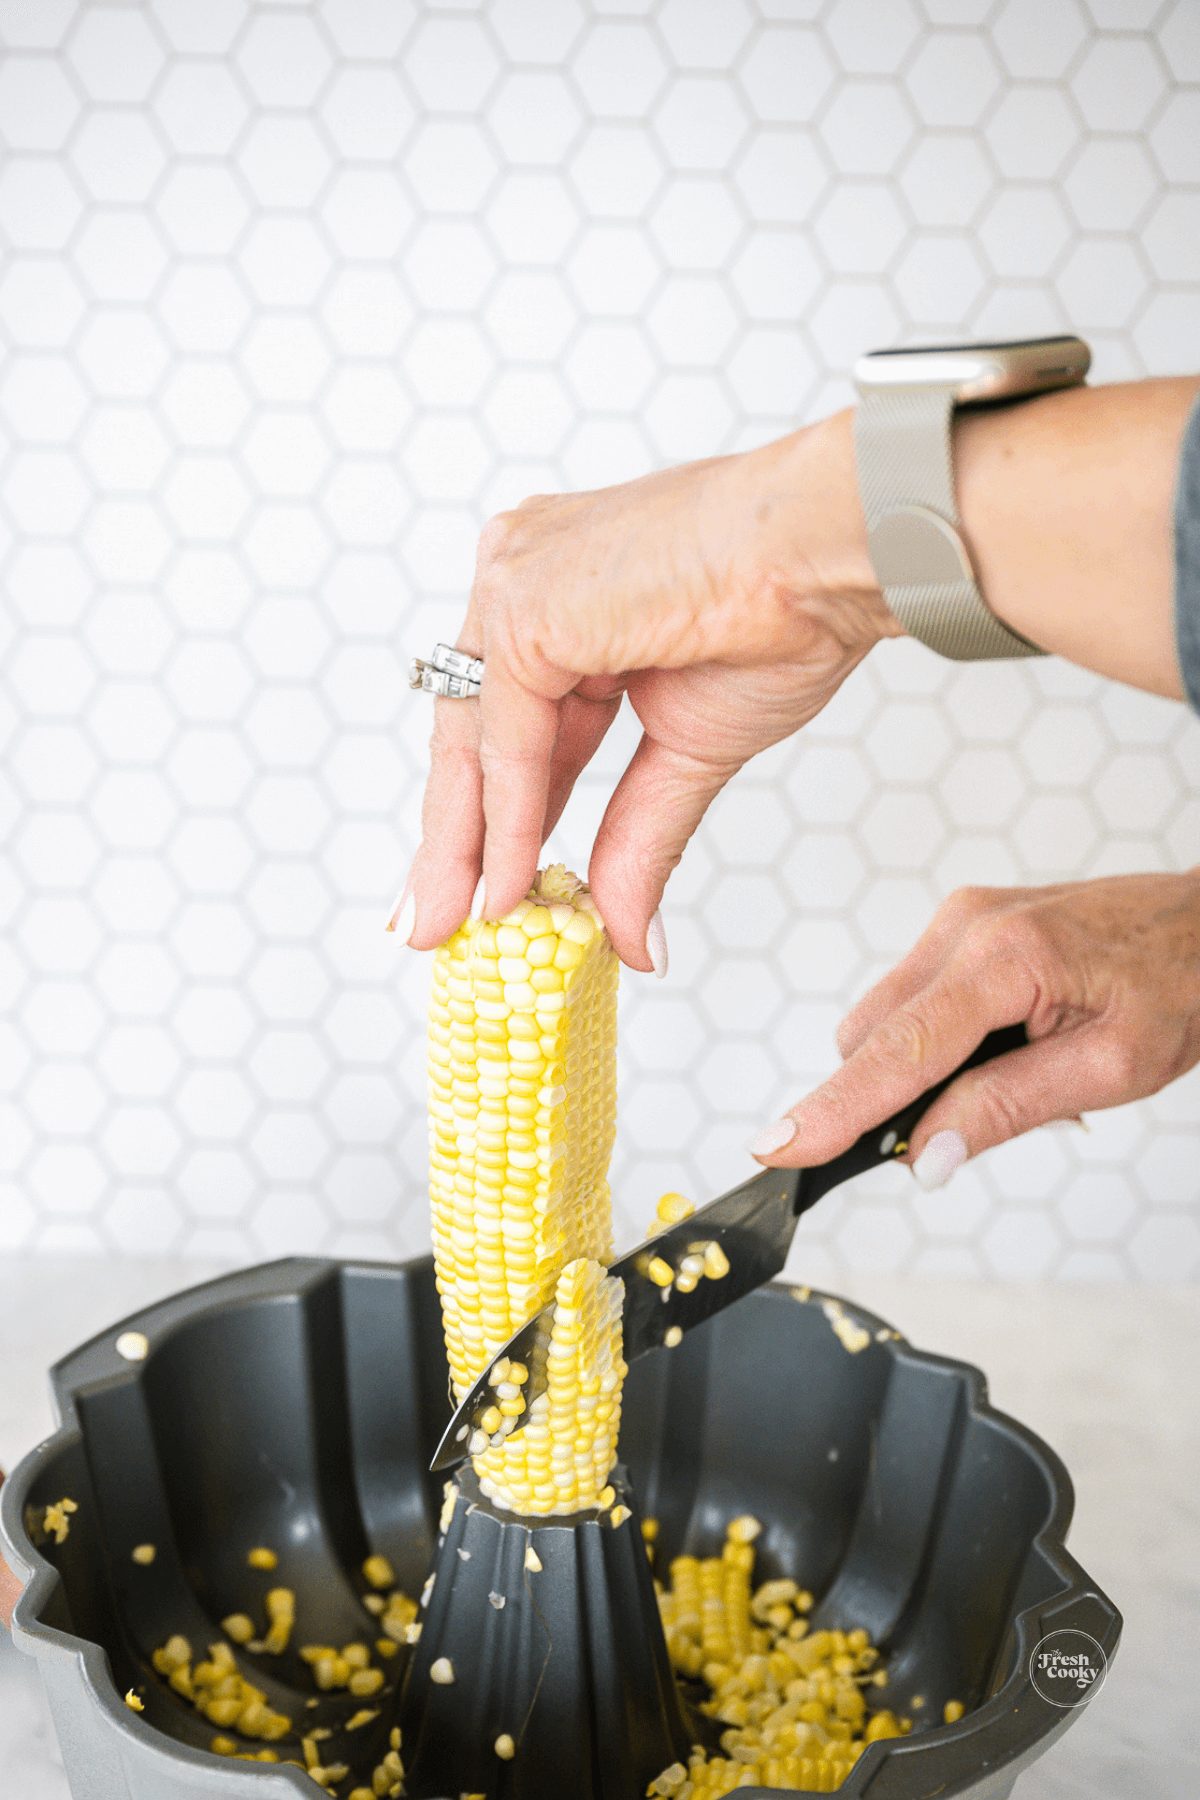 Showing how to cut corn off the cob into a bundt pan for less mess.